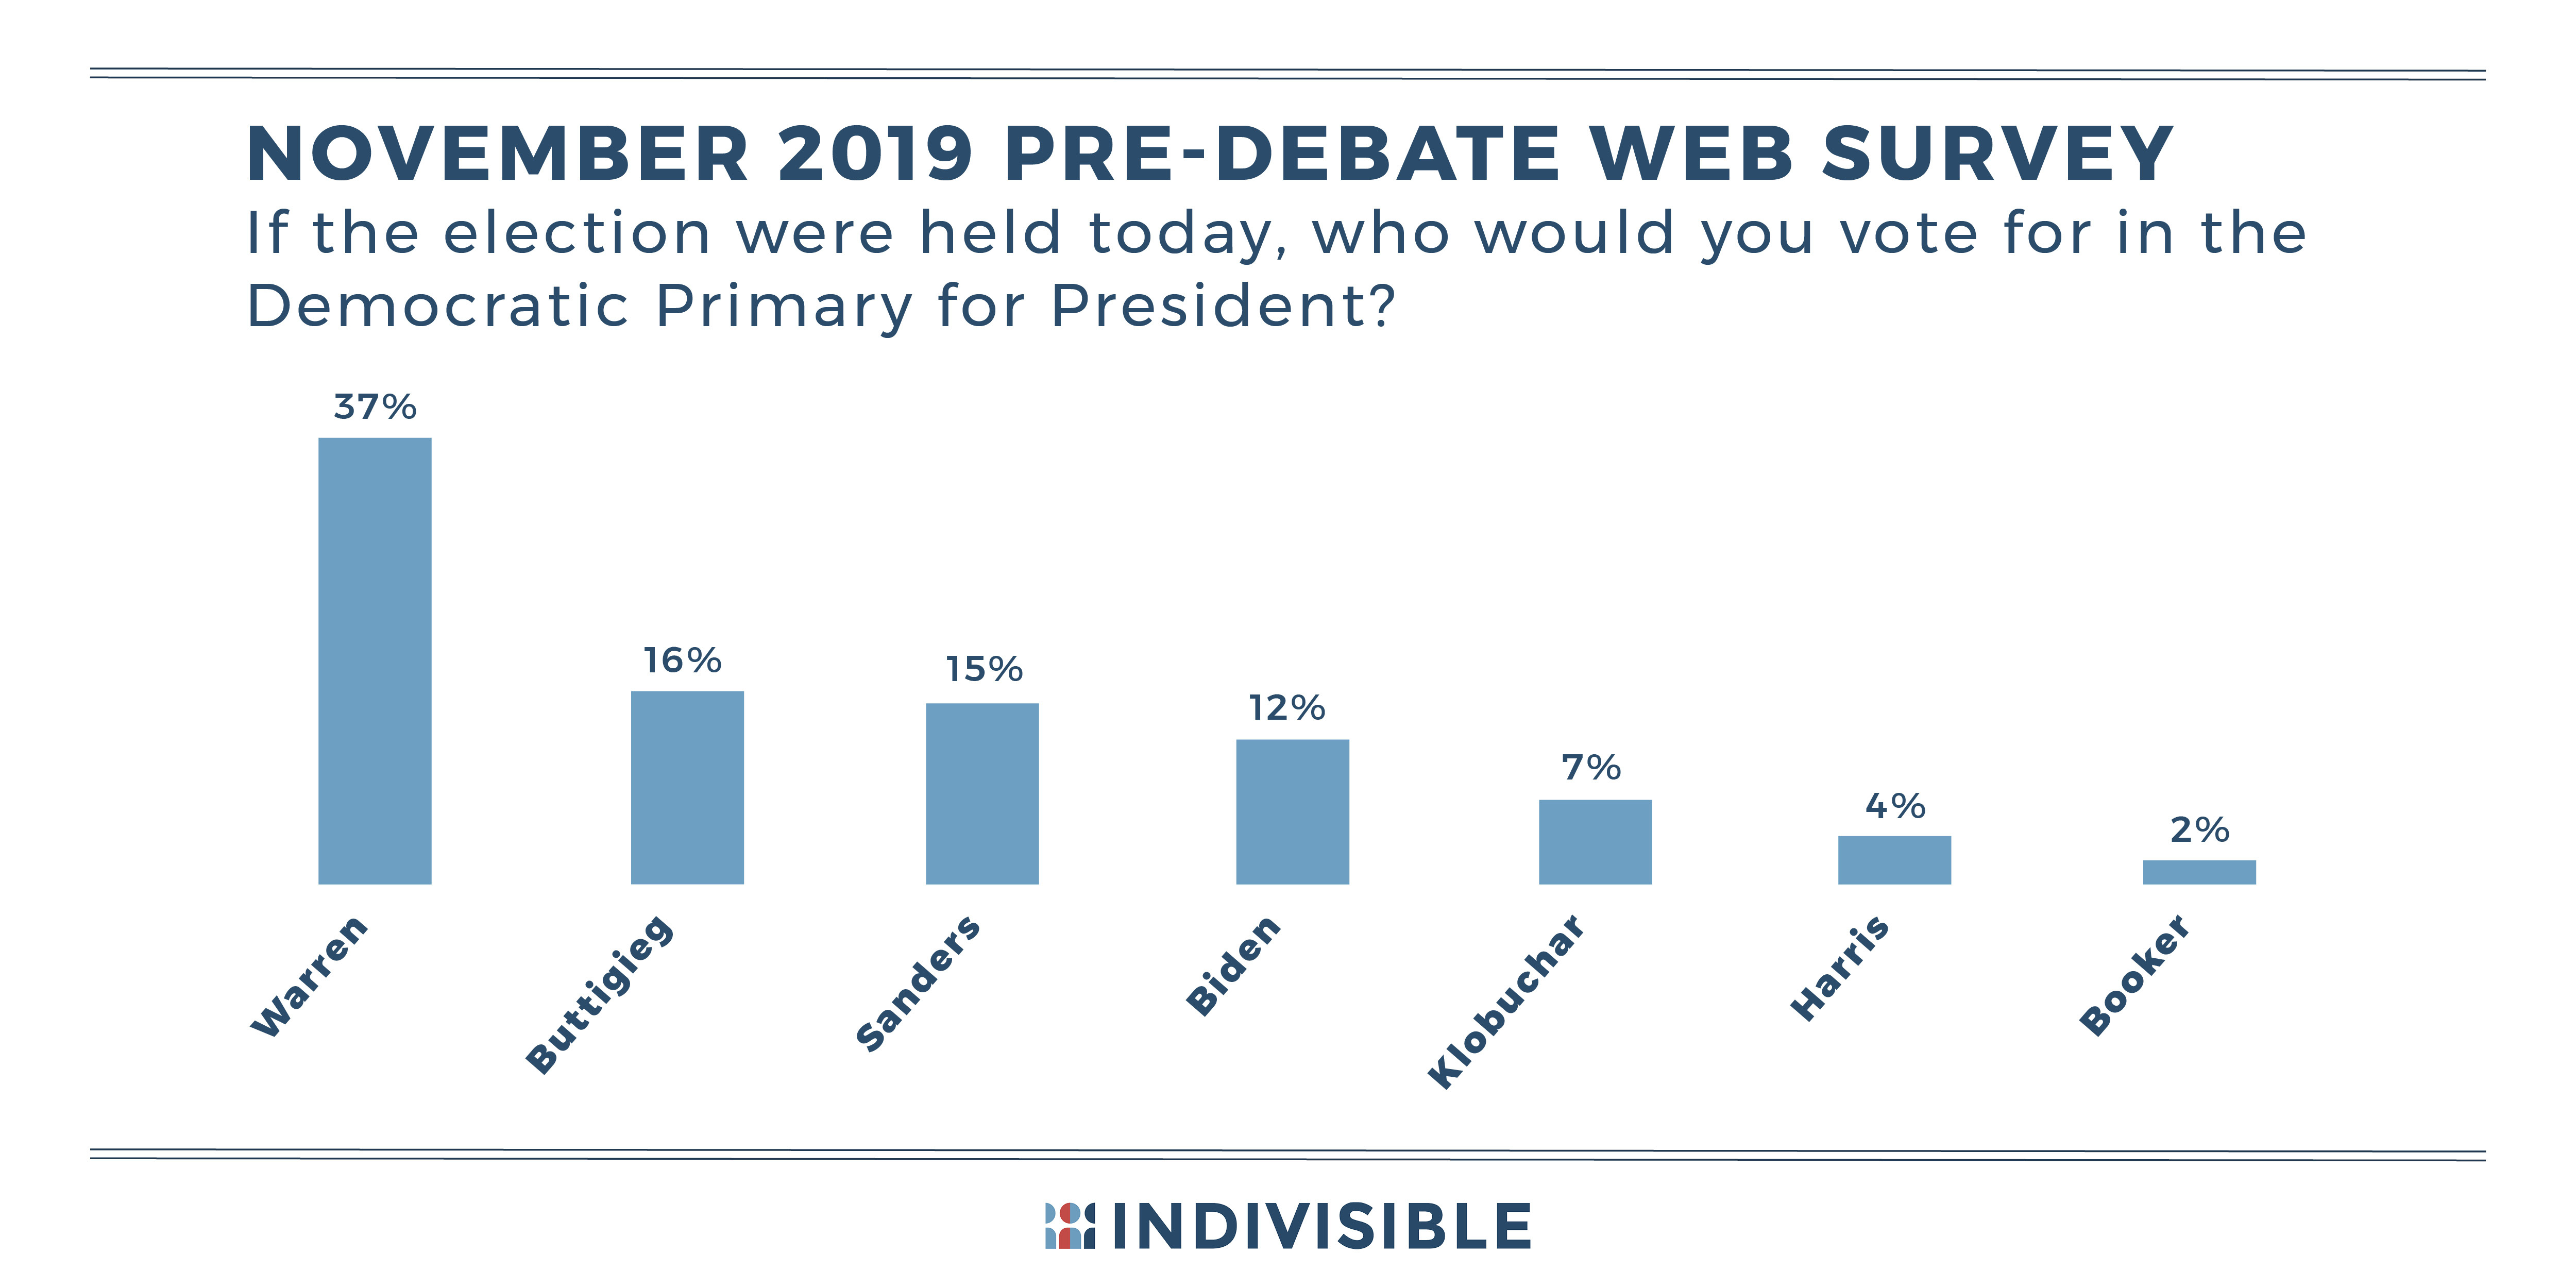 Graph showing responses to the question "If the election were held today, who would you vote for in the Democratic Primary for president?" Elizabeth Warren leads the responses followed by Pete Buttigieg.